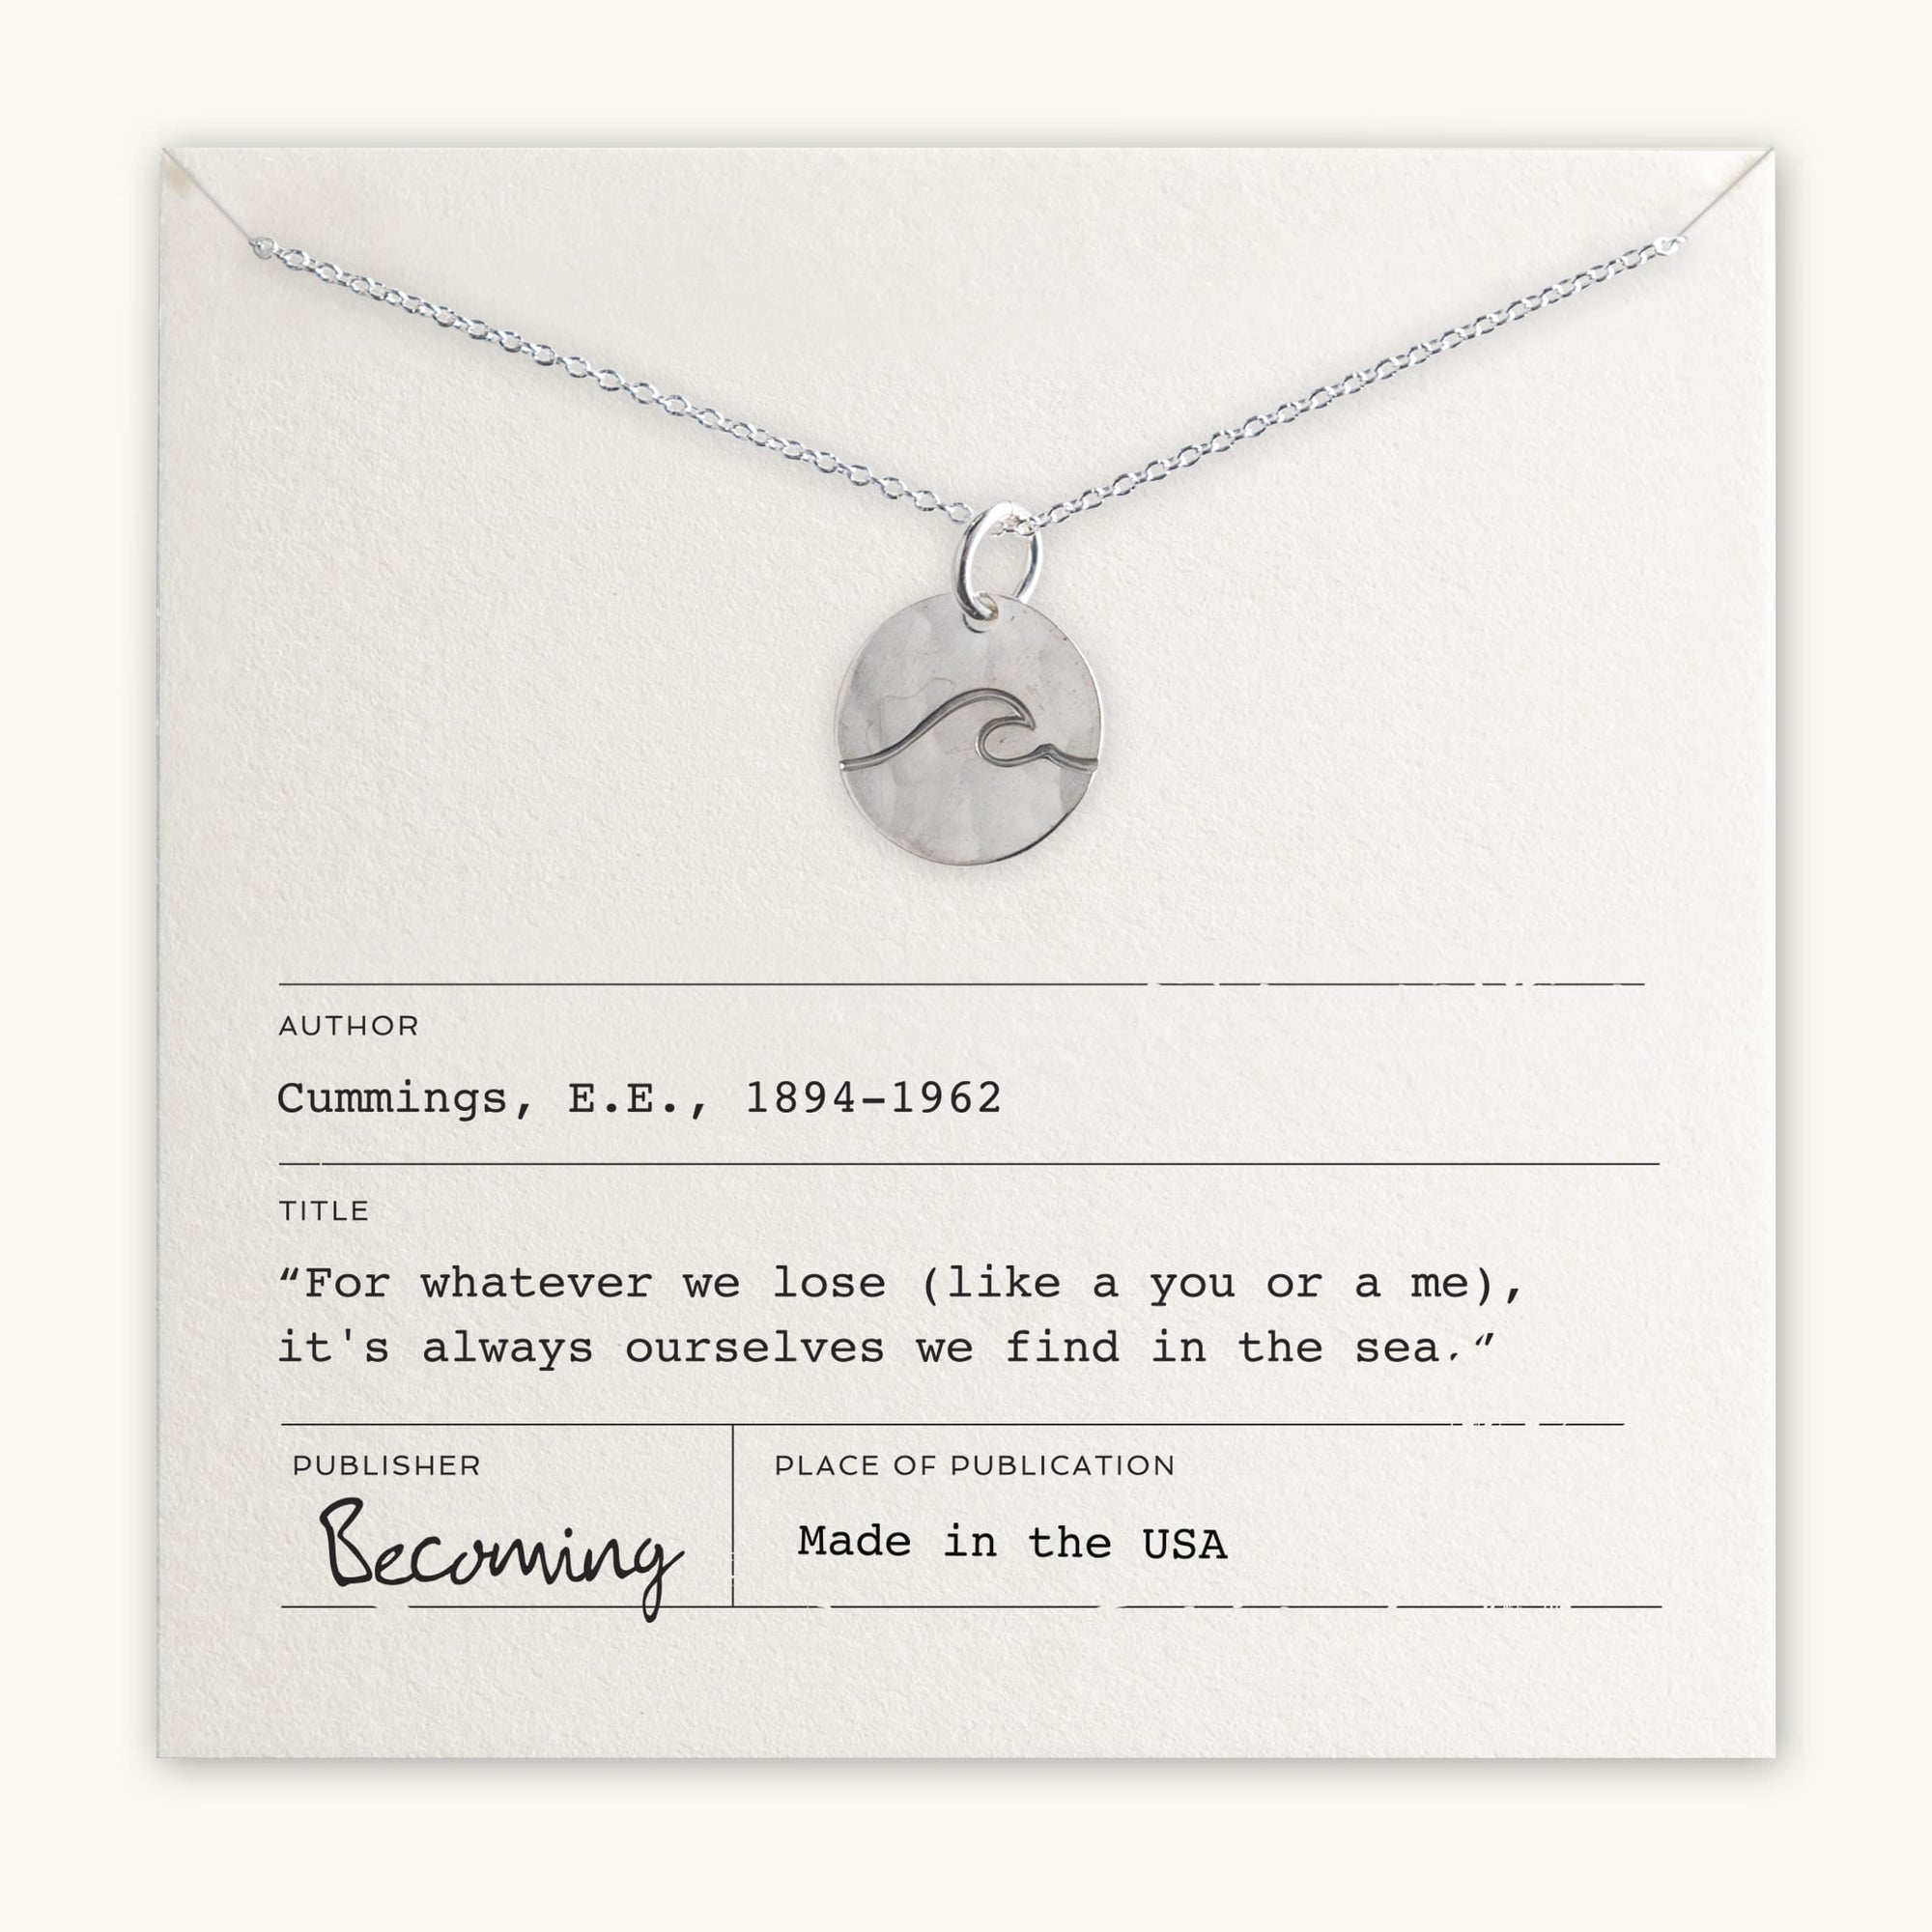 Silver Wave Round Charm Necklace by Becoming Jewelry displayed on a card featuring an inspirational quote by e.e. cummings and the word "becoming" at the bottom, indicating the piece's theme.